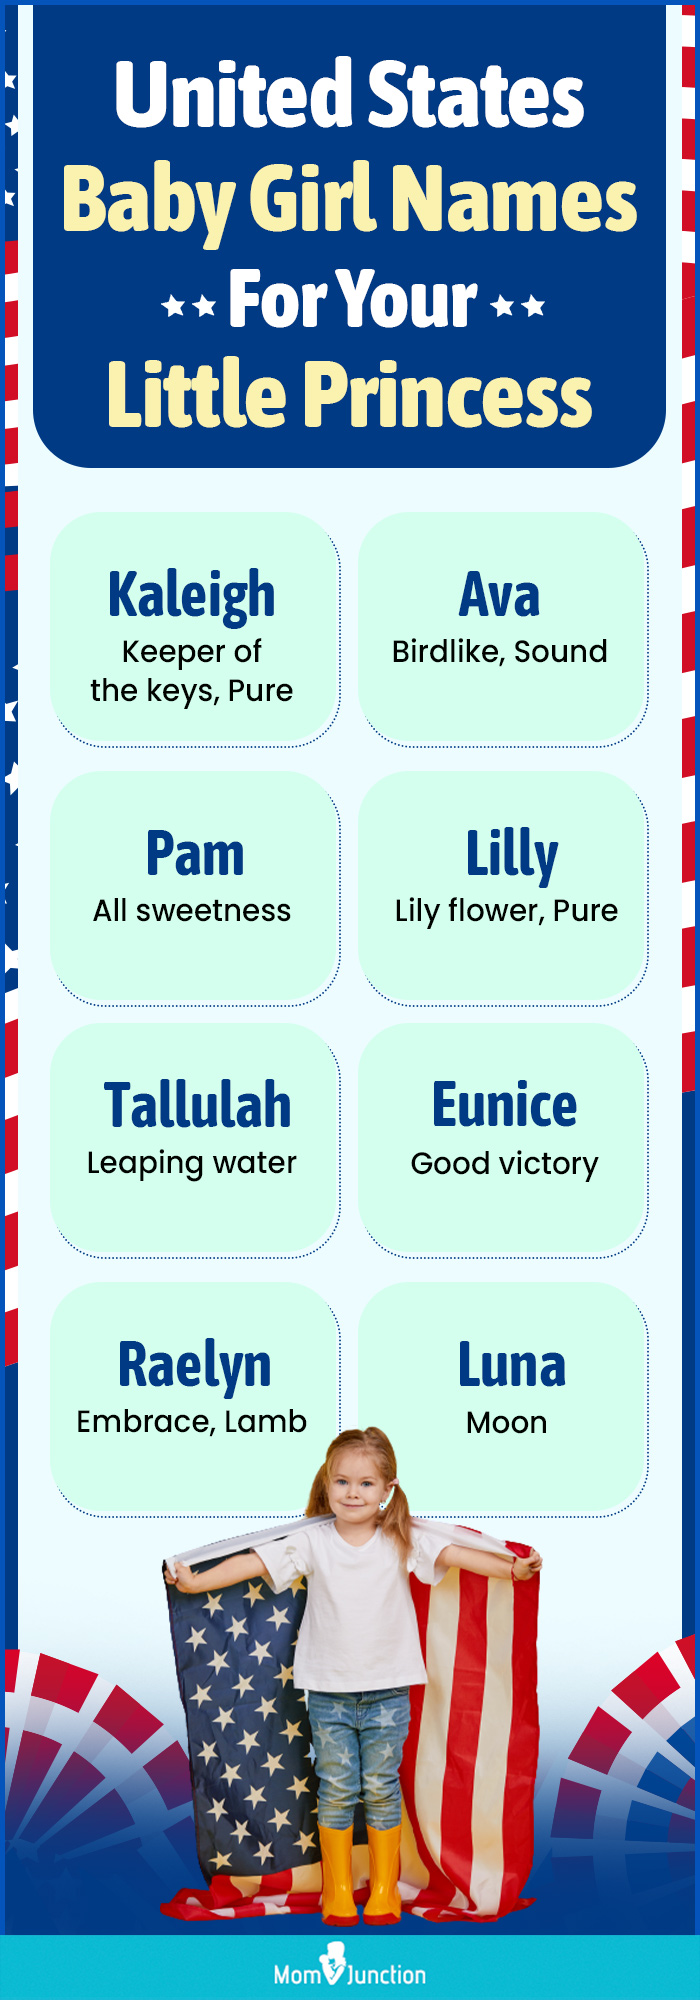 united states baby girl names for your little princess (infographic)